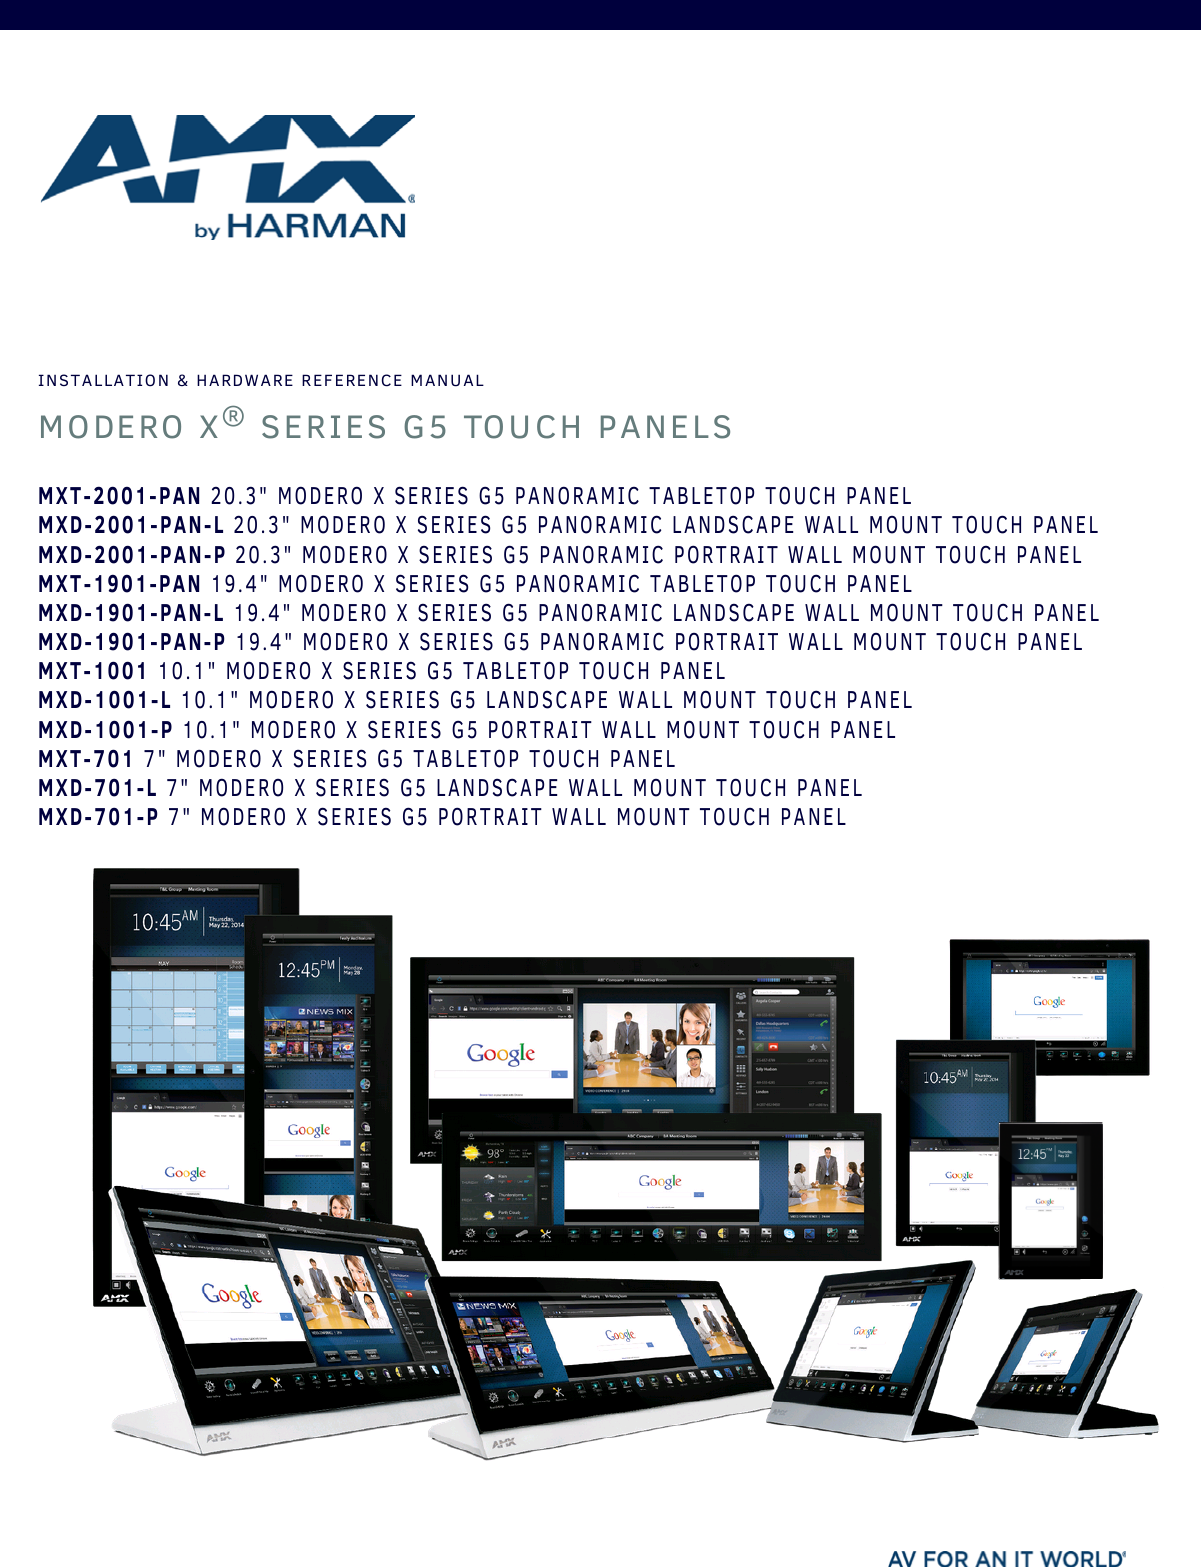 INSTALLATION &amp; HARDWARE REFERENCE MANUALMODERO X® SERIES G5 TOUCH PANELSMXT-2001-PAN 20.3&quot; MODERO X SERIES G5 PANORAMIC TABLETOP TOUCH PANELMXD-2001-PAN-L 20.3&quot; MODERO X SERIES G5 PANORAMIC LANDSCAPE WALL MOUNT TOUCH PANELMXD-2001-PAN-P 20.3&quot; MODERO X SERIES G5 PANORAMIC PORTRAIT WALL MOUNT TOUCH PANELMXT-1901-PAN 19.4&quot; MODERO X SERIES G5 PANORAMIC TABLETOP TOUCH PANELMXD-1901-PAN-L 19.4&quot; MODERO X SERIES G5 PANORAMIC LANDSCAPE WALL MOUNT TOUCH PANELMXD-1901-PAN-P 19.4&quot; MODERO X SERIES G5 PANORAMIC PORTRAIT WALL MOUNT TOUCH PANELMXT-1001 10.1&quot; MODERO X SERIES G5 TABLETOP TOUCH PANELMXD-1001-L 10.1&quot; MODERO X SERIES G5 LANDSCAPE WALL MOUNT TOUCH PANELMXD-1001-P 10.1&quot; MODERO X SERIES G5 PORTRAIT WALL MOUNT TOUCH PANELMXT-701 7&quot; MODERO X SERIES G5 TABLETOP TOUCH PANELMXD-701-L 7&quot; MODERO X SERIES G5 LANDSCAPE WALL MOUNT TOUCH PANELMXD-701-P 7&quot; MODERO X SERIES G5 PORTRAIT WALL MOUNT TOUCH PANEL